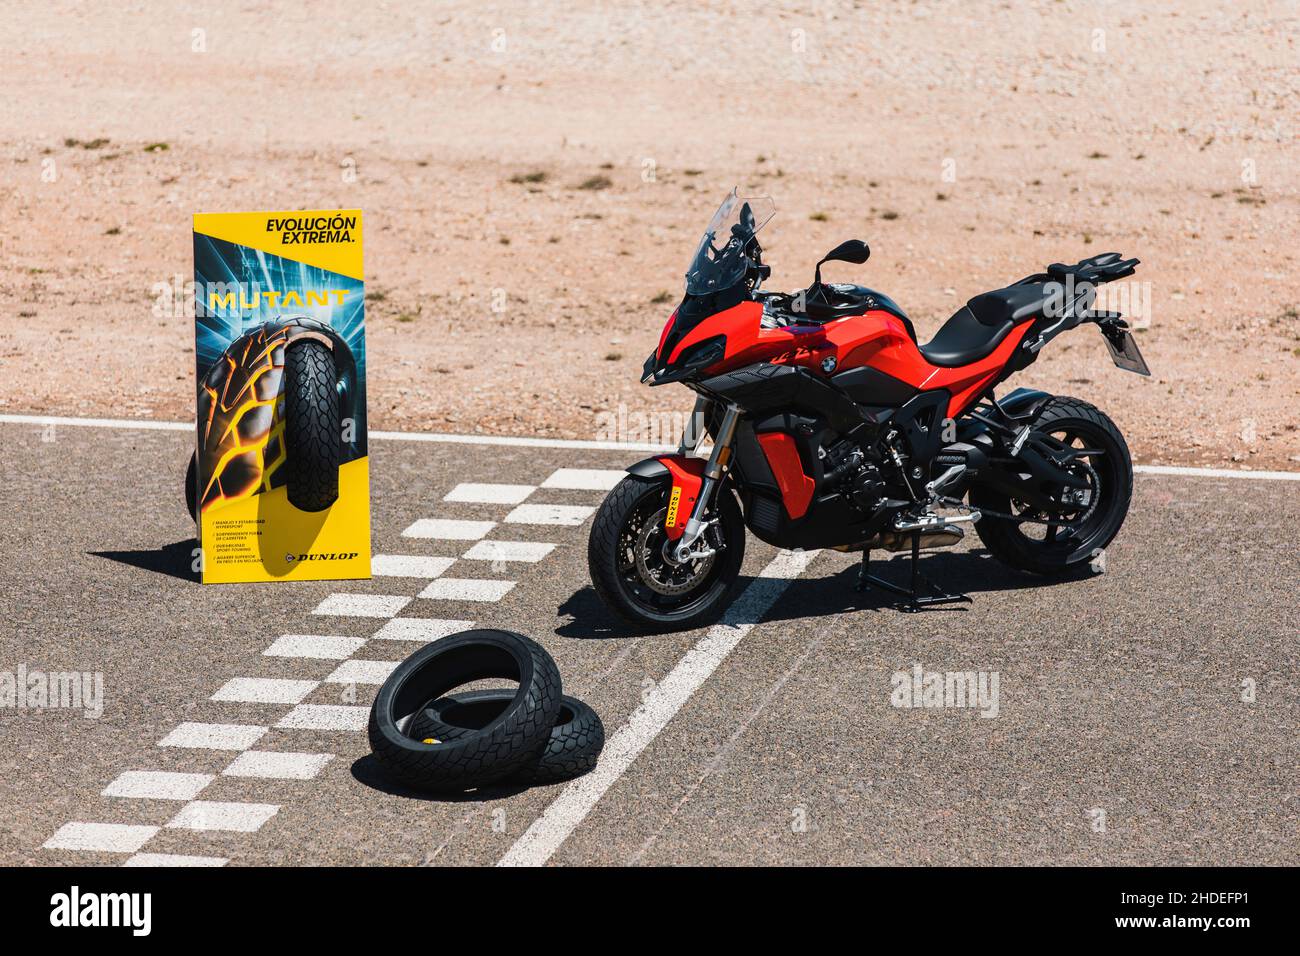 Almería, Spain - May 4th 2021: A red BMW motorbike and Dunlop Mutant Tyres  advertisement totem on the circuit finish line, during Dunlop Xperience sho  Stock Photo - Alamy